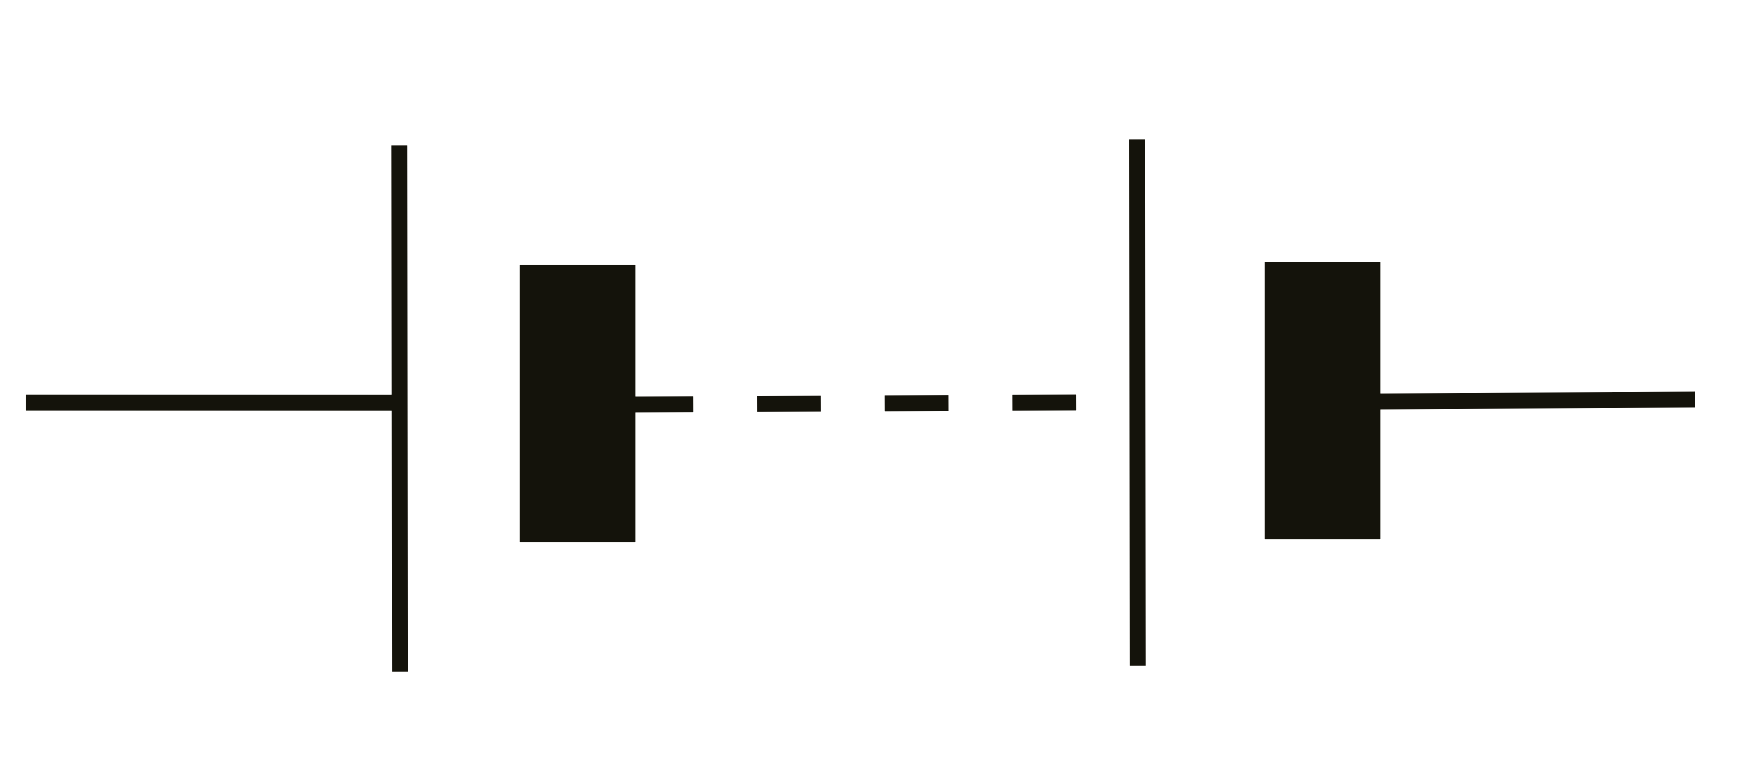 Component. battery circuit symbol: Schematic Symbol For A Dc ...